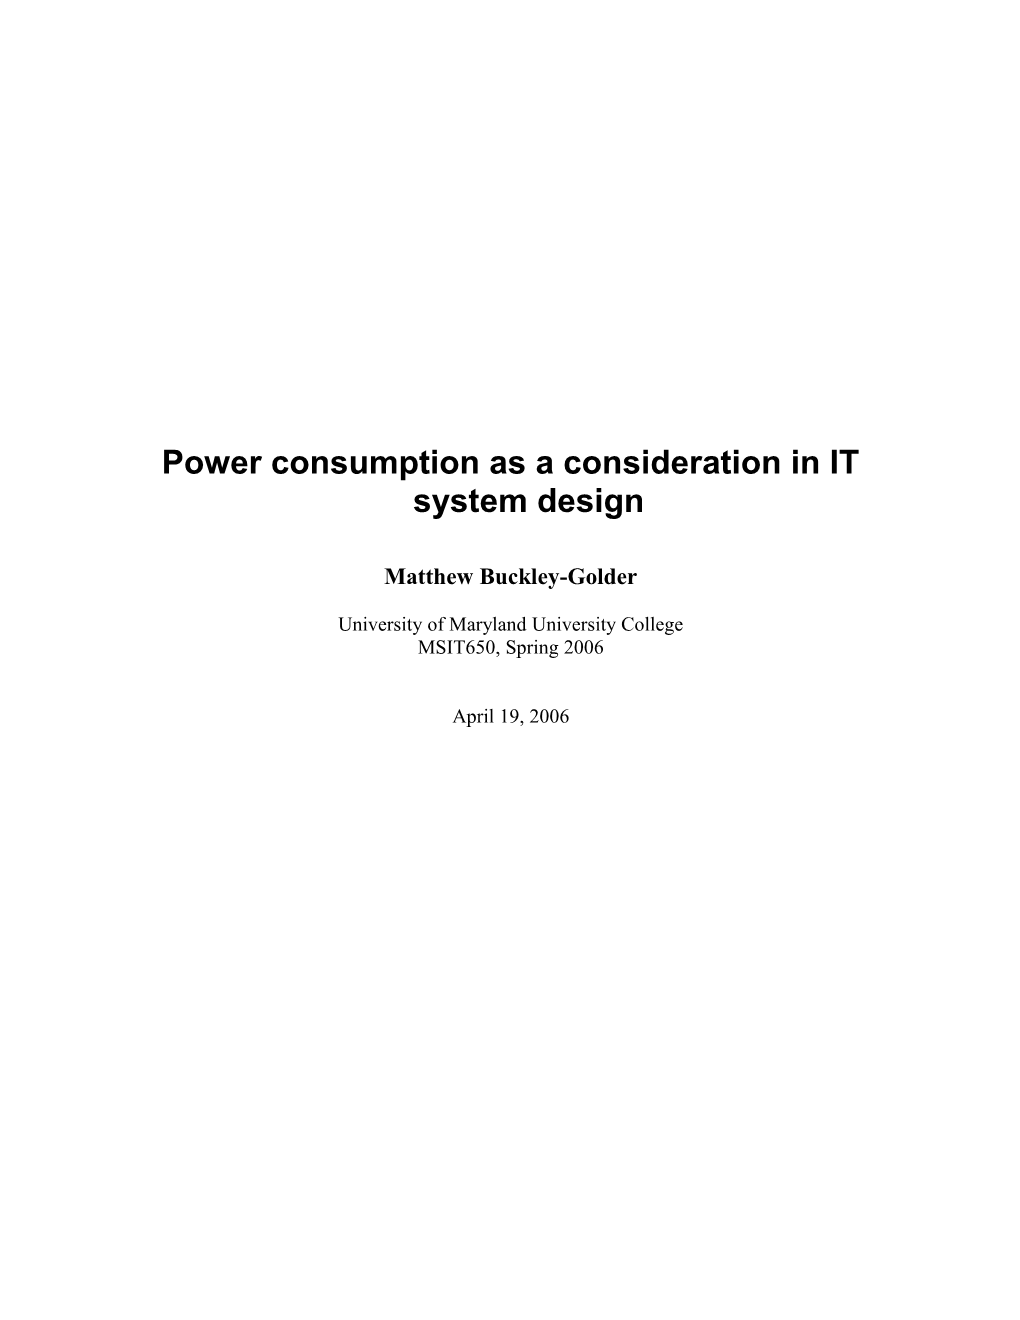 Power Consumption As a Consideration in IT System Design